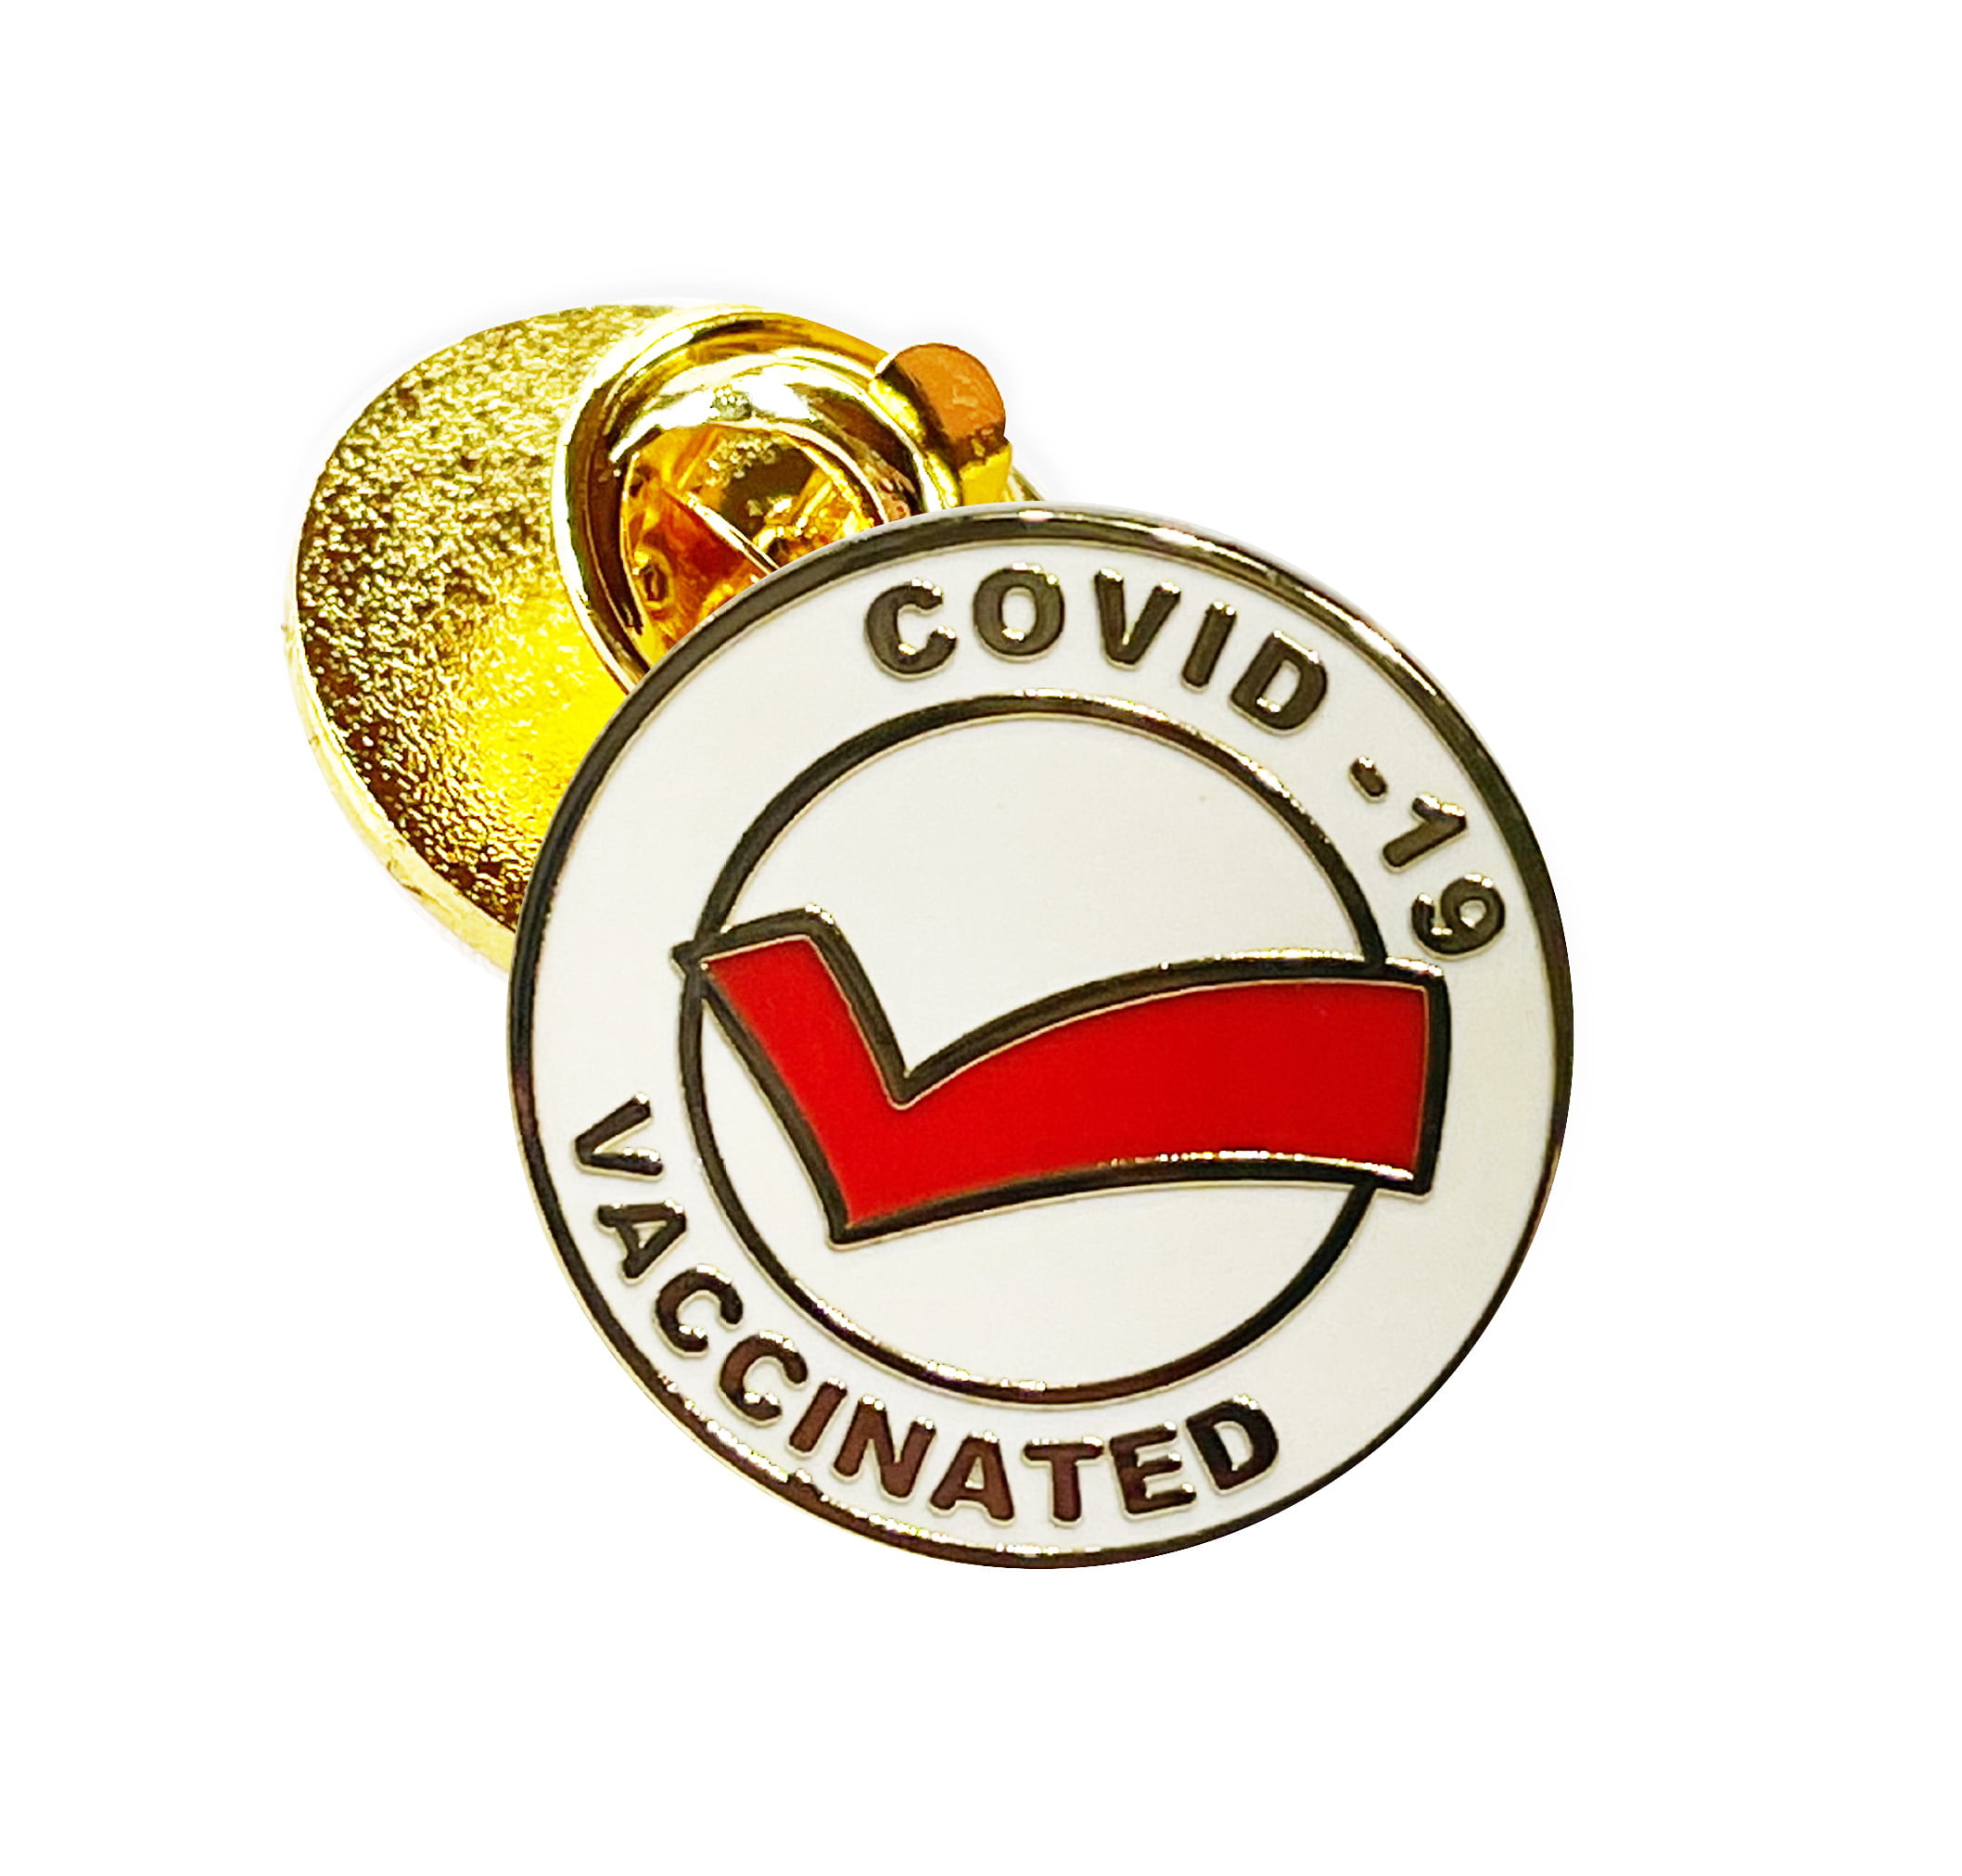 I Got Vaccinated 1/5 Pieces Pins Recipient Notification CDC Encouraged Public Health Commemorate Pin Back Button Badges 2.25 Inch Round Lucky Badge Button Pins for Mens and Womens 